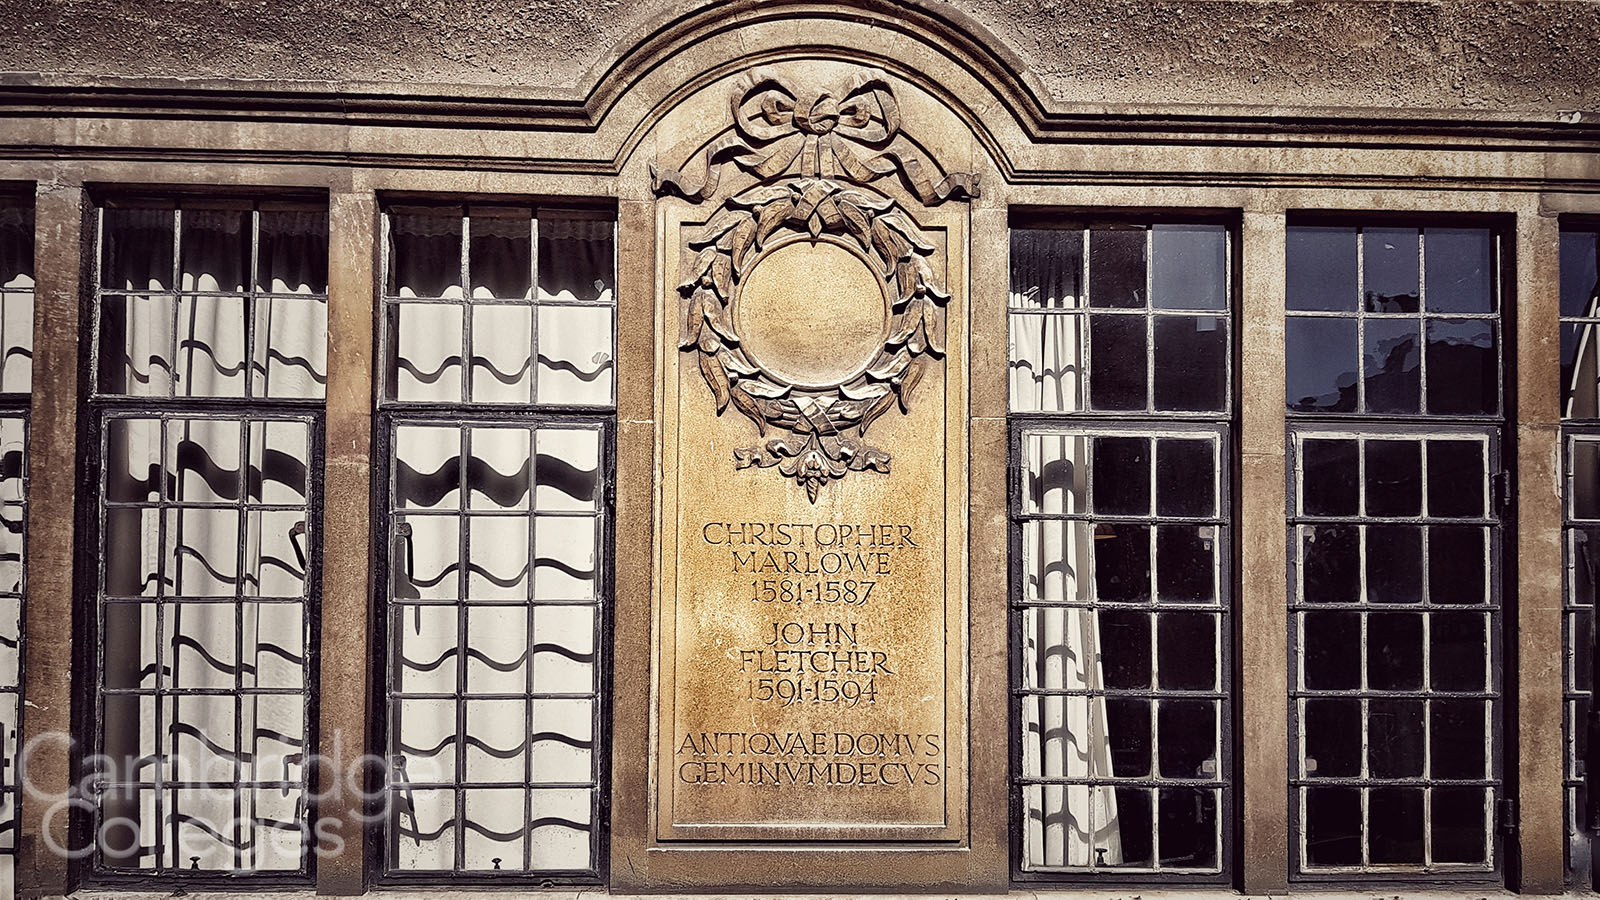 A plaque in Corpus Old Court commemorates both Christopher Marlowe and John Fletcher